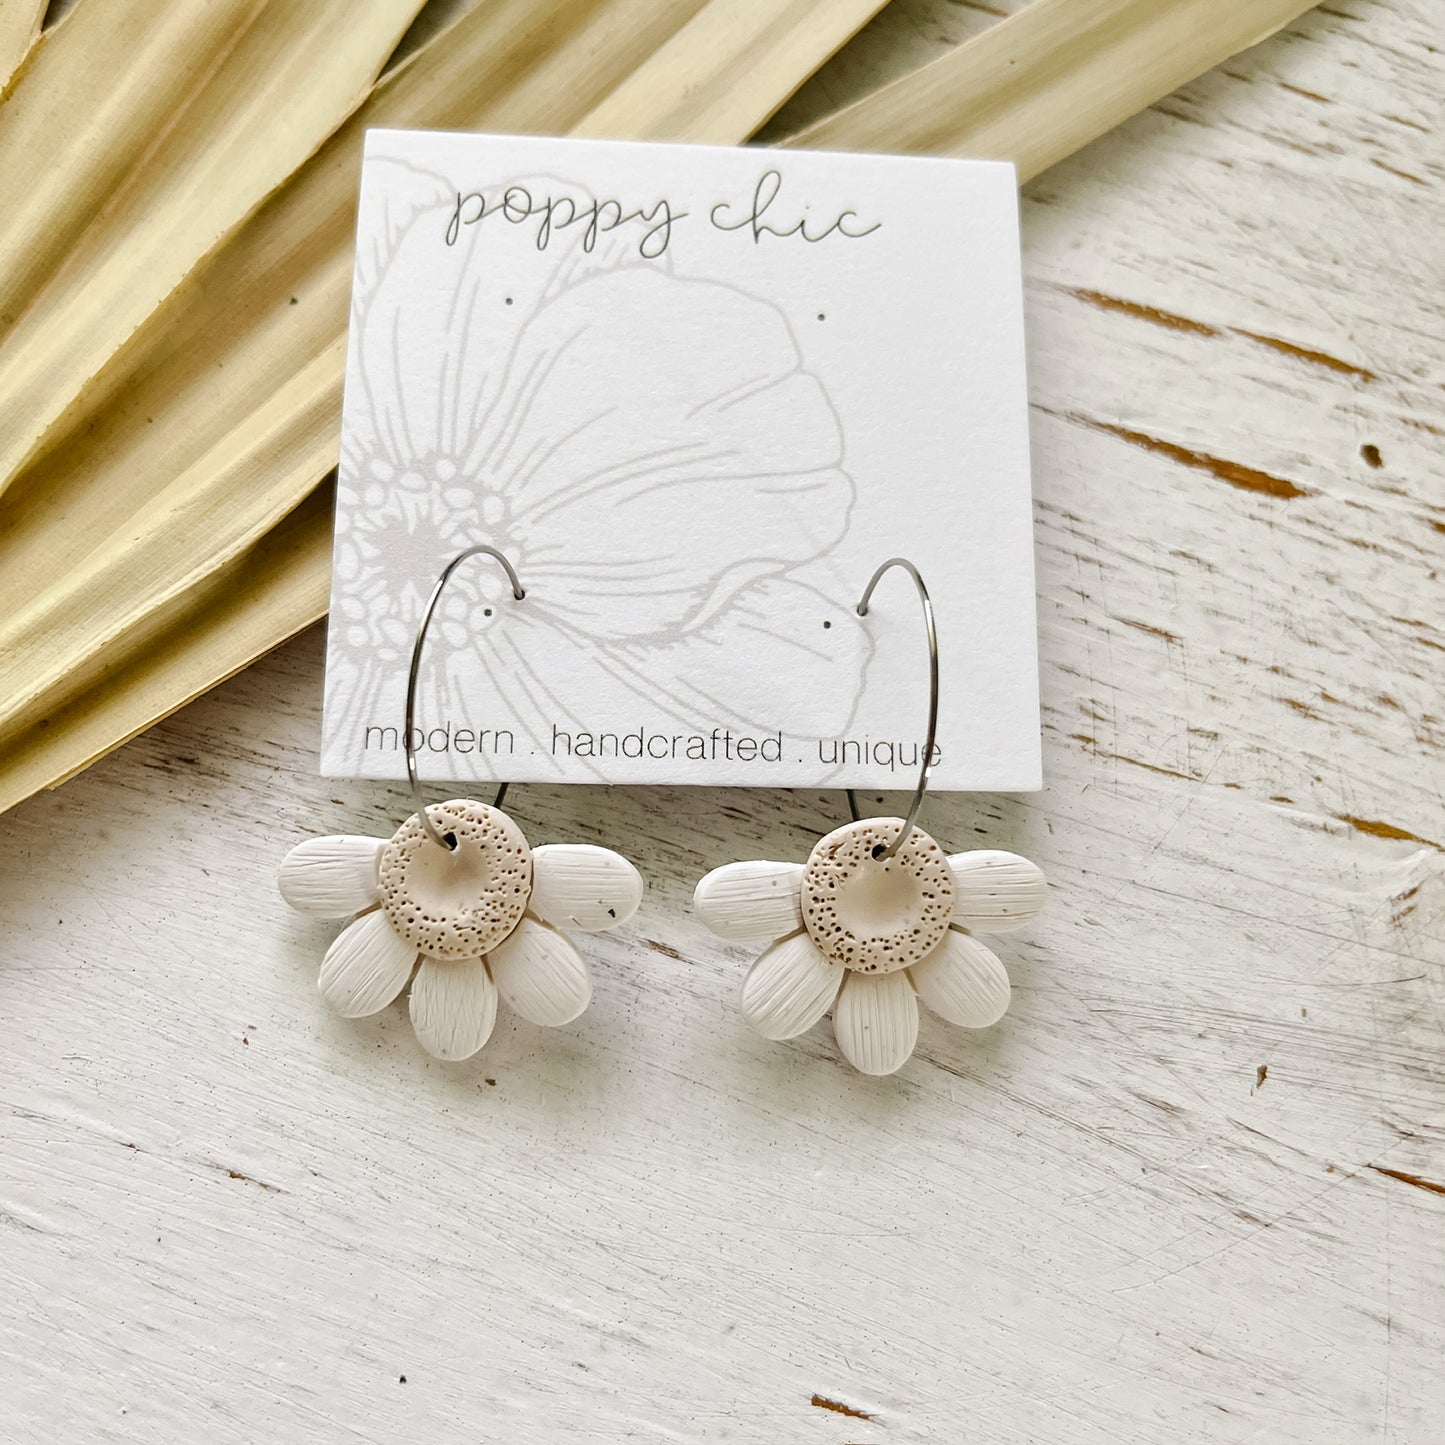 Handmade Daisy Shaped Polymer Clay Earrings in White and Cream